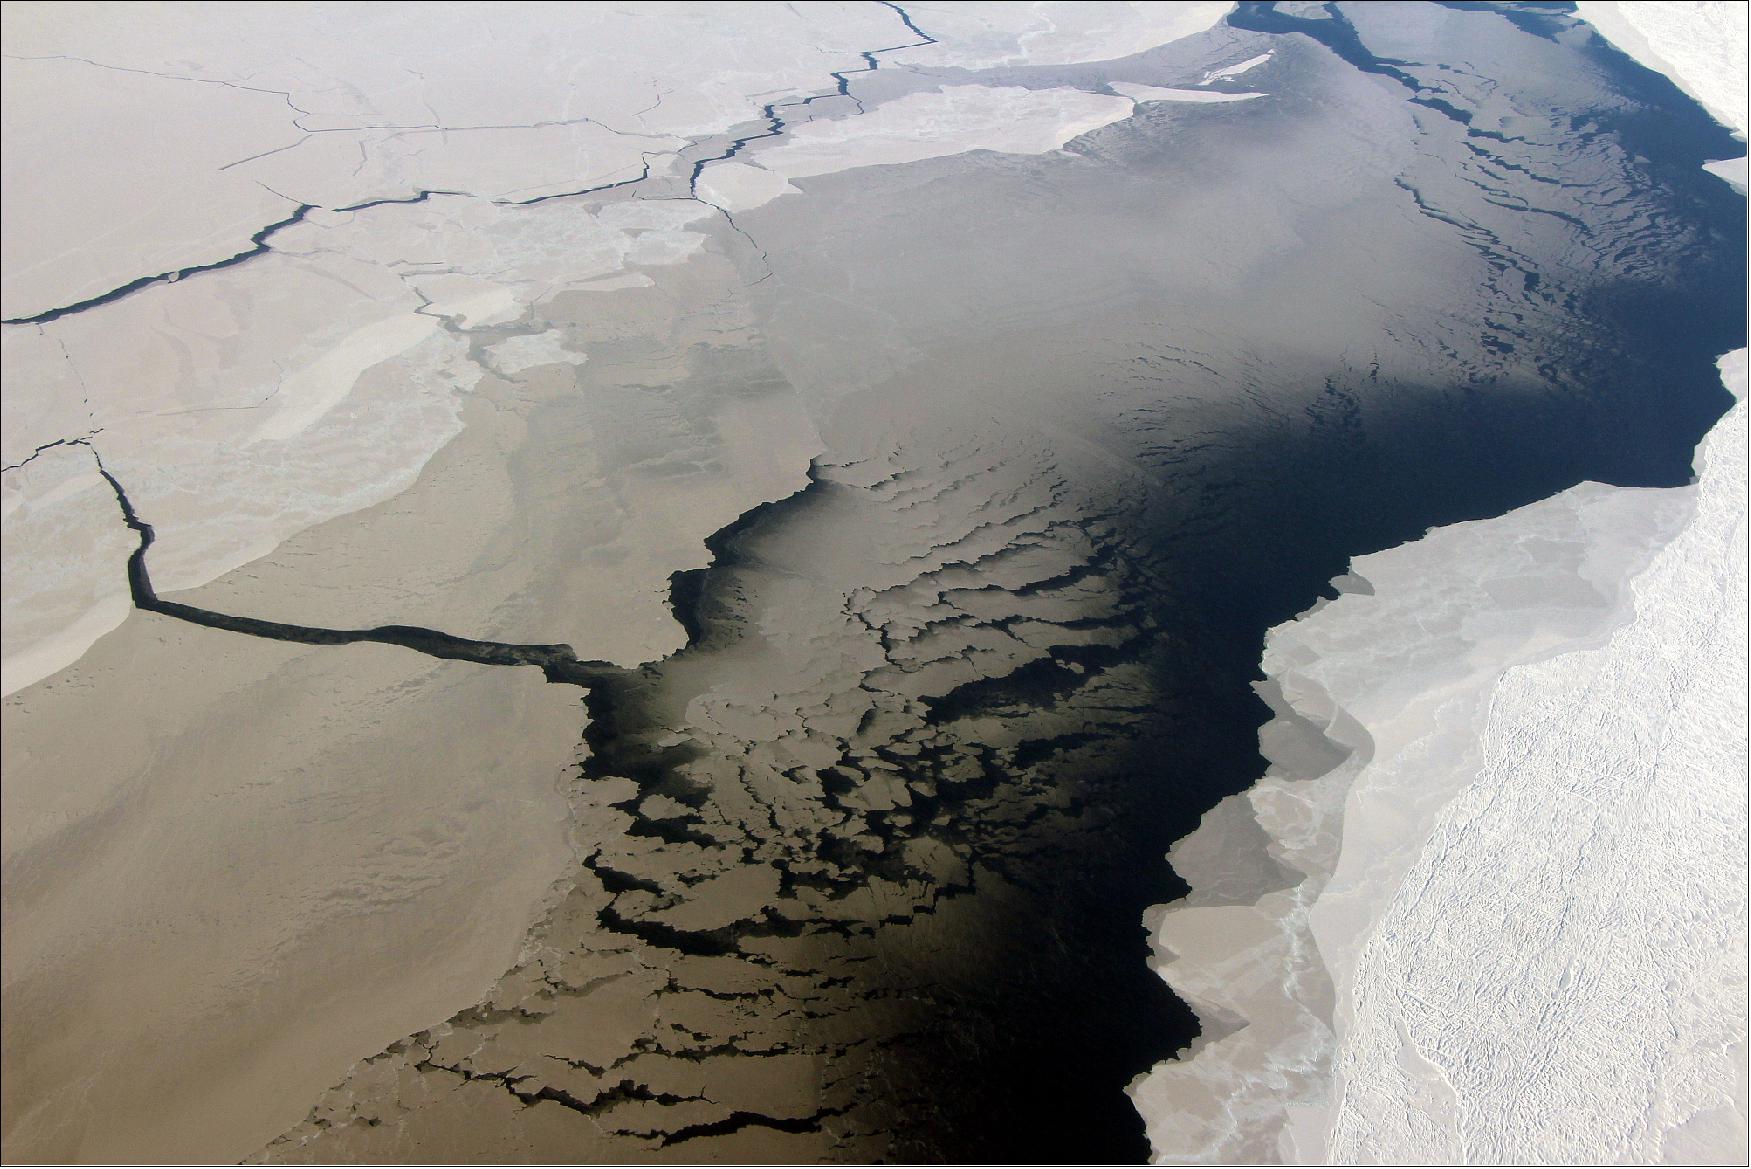 Figure 71: A coastal polynya, or opening in the sea ice cover, near the Filchner Ice Shelf in Antarctica, as seen during an Operation IceBridge flight on 10 October 2018 (image credit: NASA/John Sonntag)